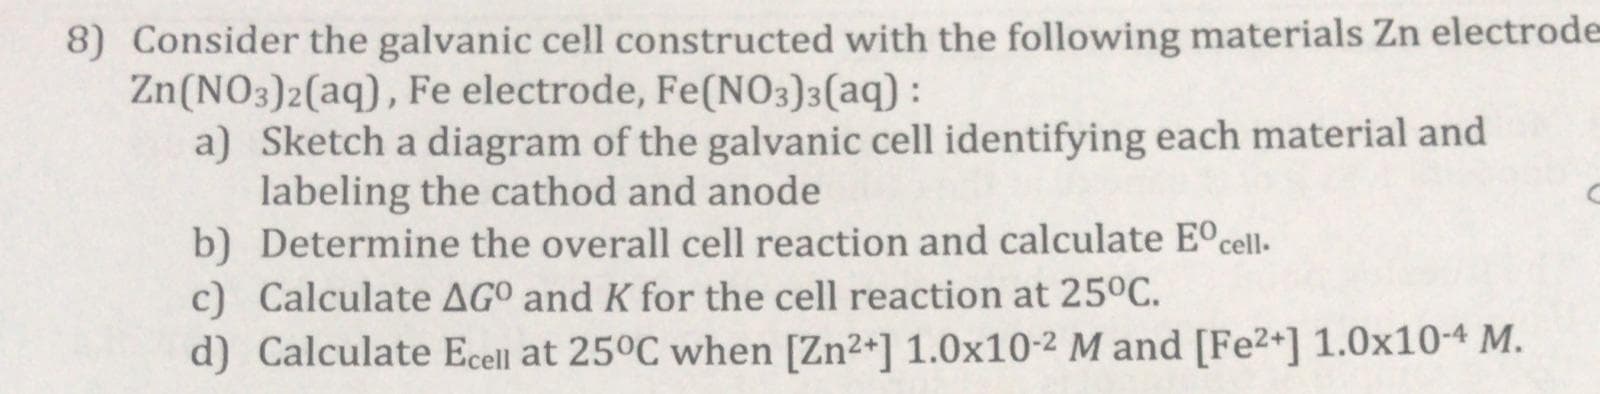 Consider the galvanic cell constructed with the following materials Zn electrode
Zn(NO3)2(aq), Fe electrode, Fe(NO3)3(aq) :
a) Sketch a diagram of the galvanic cell identifying each material and
labeling the cathod and anode
b) Determine the overall cell reaction and calculate Eºcell-
